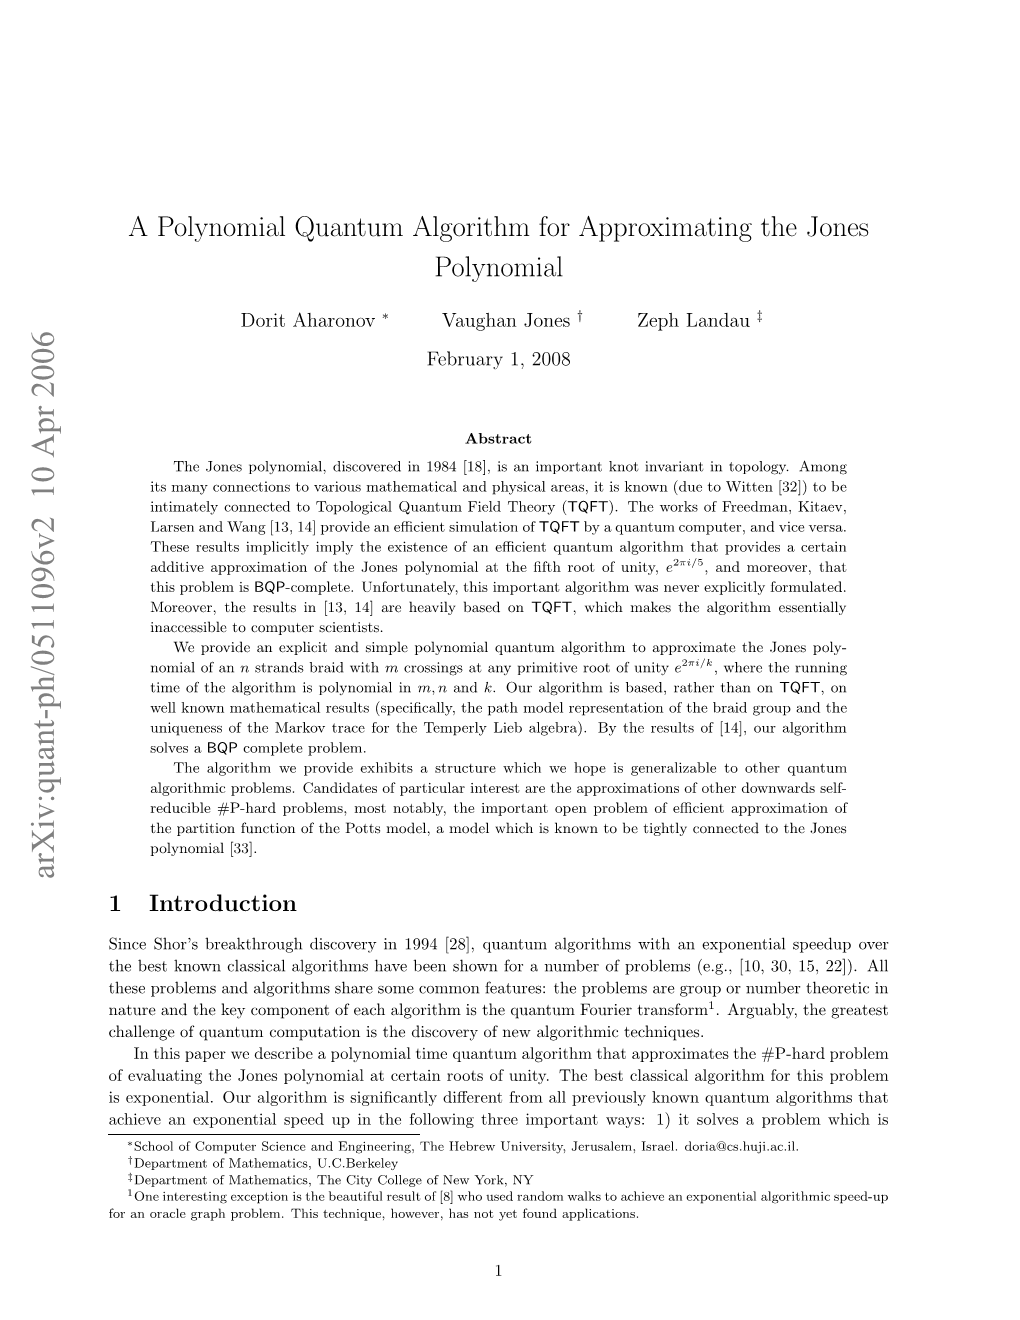 A Polynomial Quantum Algorithm for Approximating